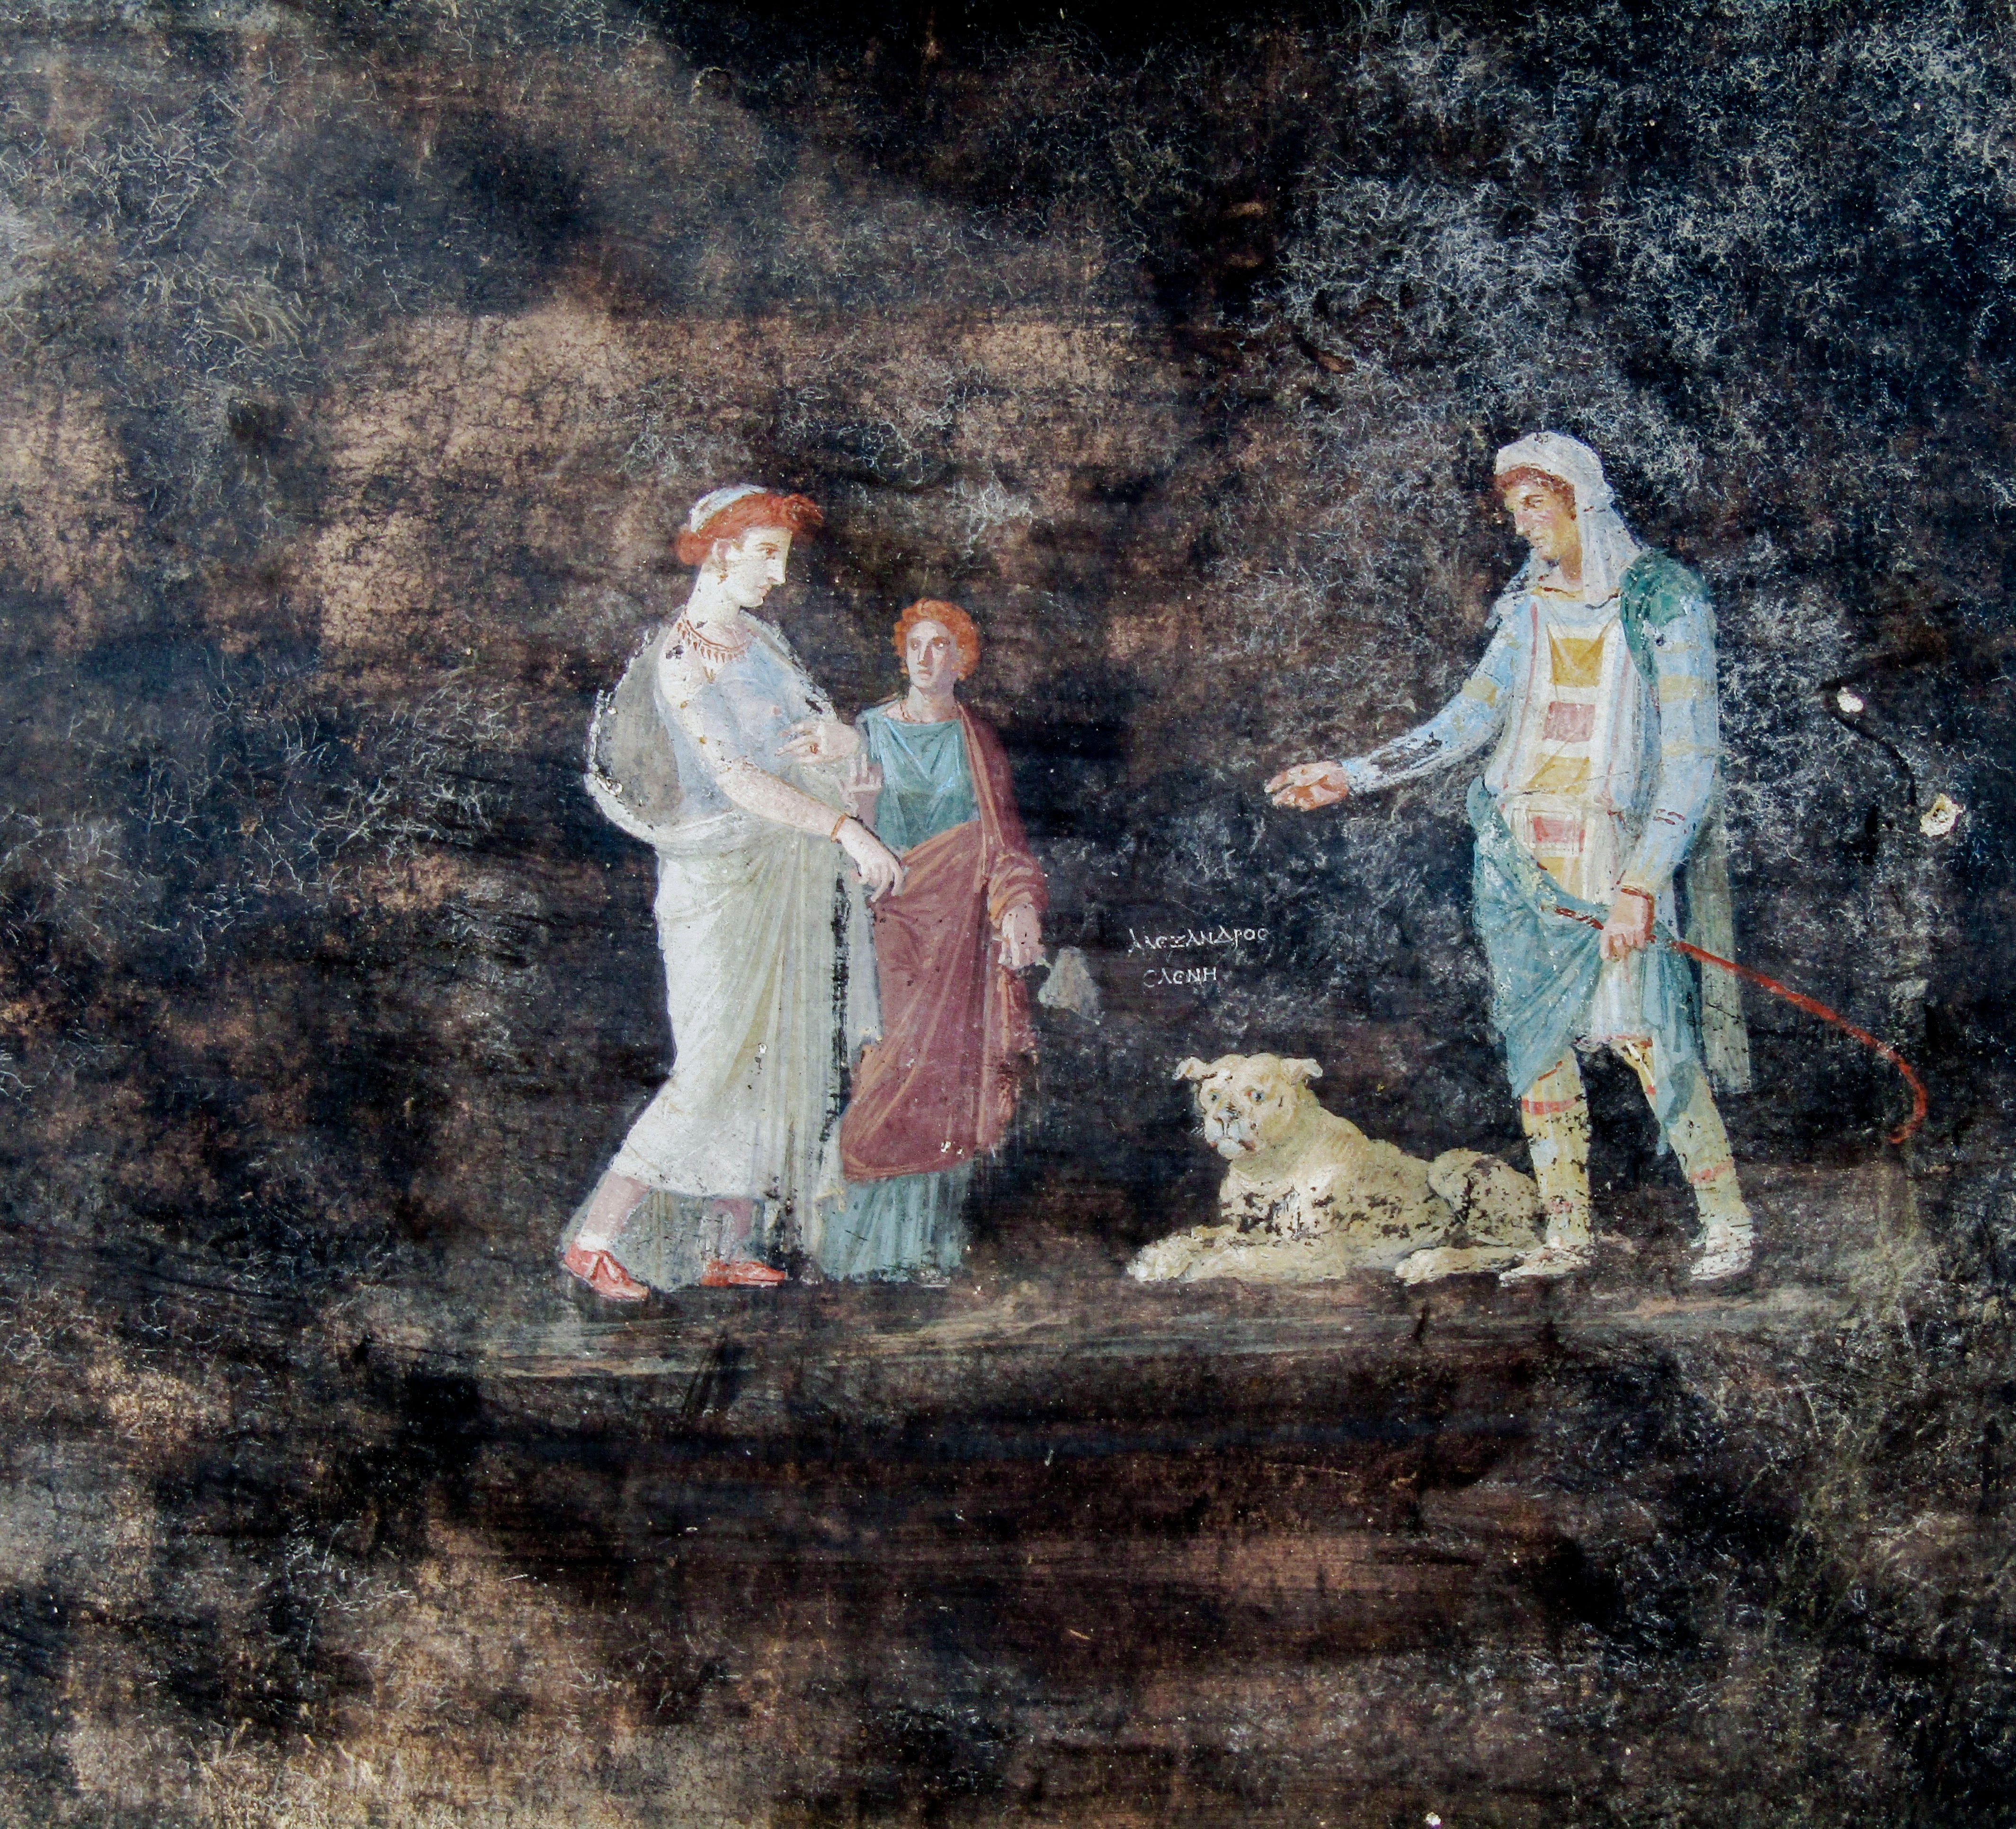 This image released by the Italian Culture Ministry on Wednesday, April 10, 2024, shows a fresco depicting the Greek mythology's figures of Helen, left, and Paris of Troy, right, inside an imposing banquet hall, with elegant black walls, decorated with mythological subjects inspired by the Trojan War.